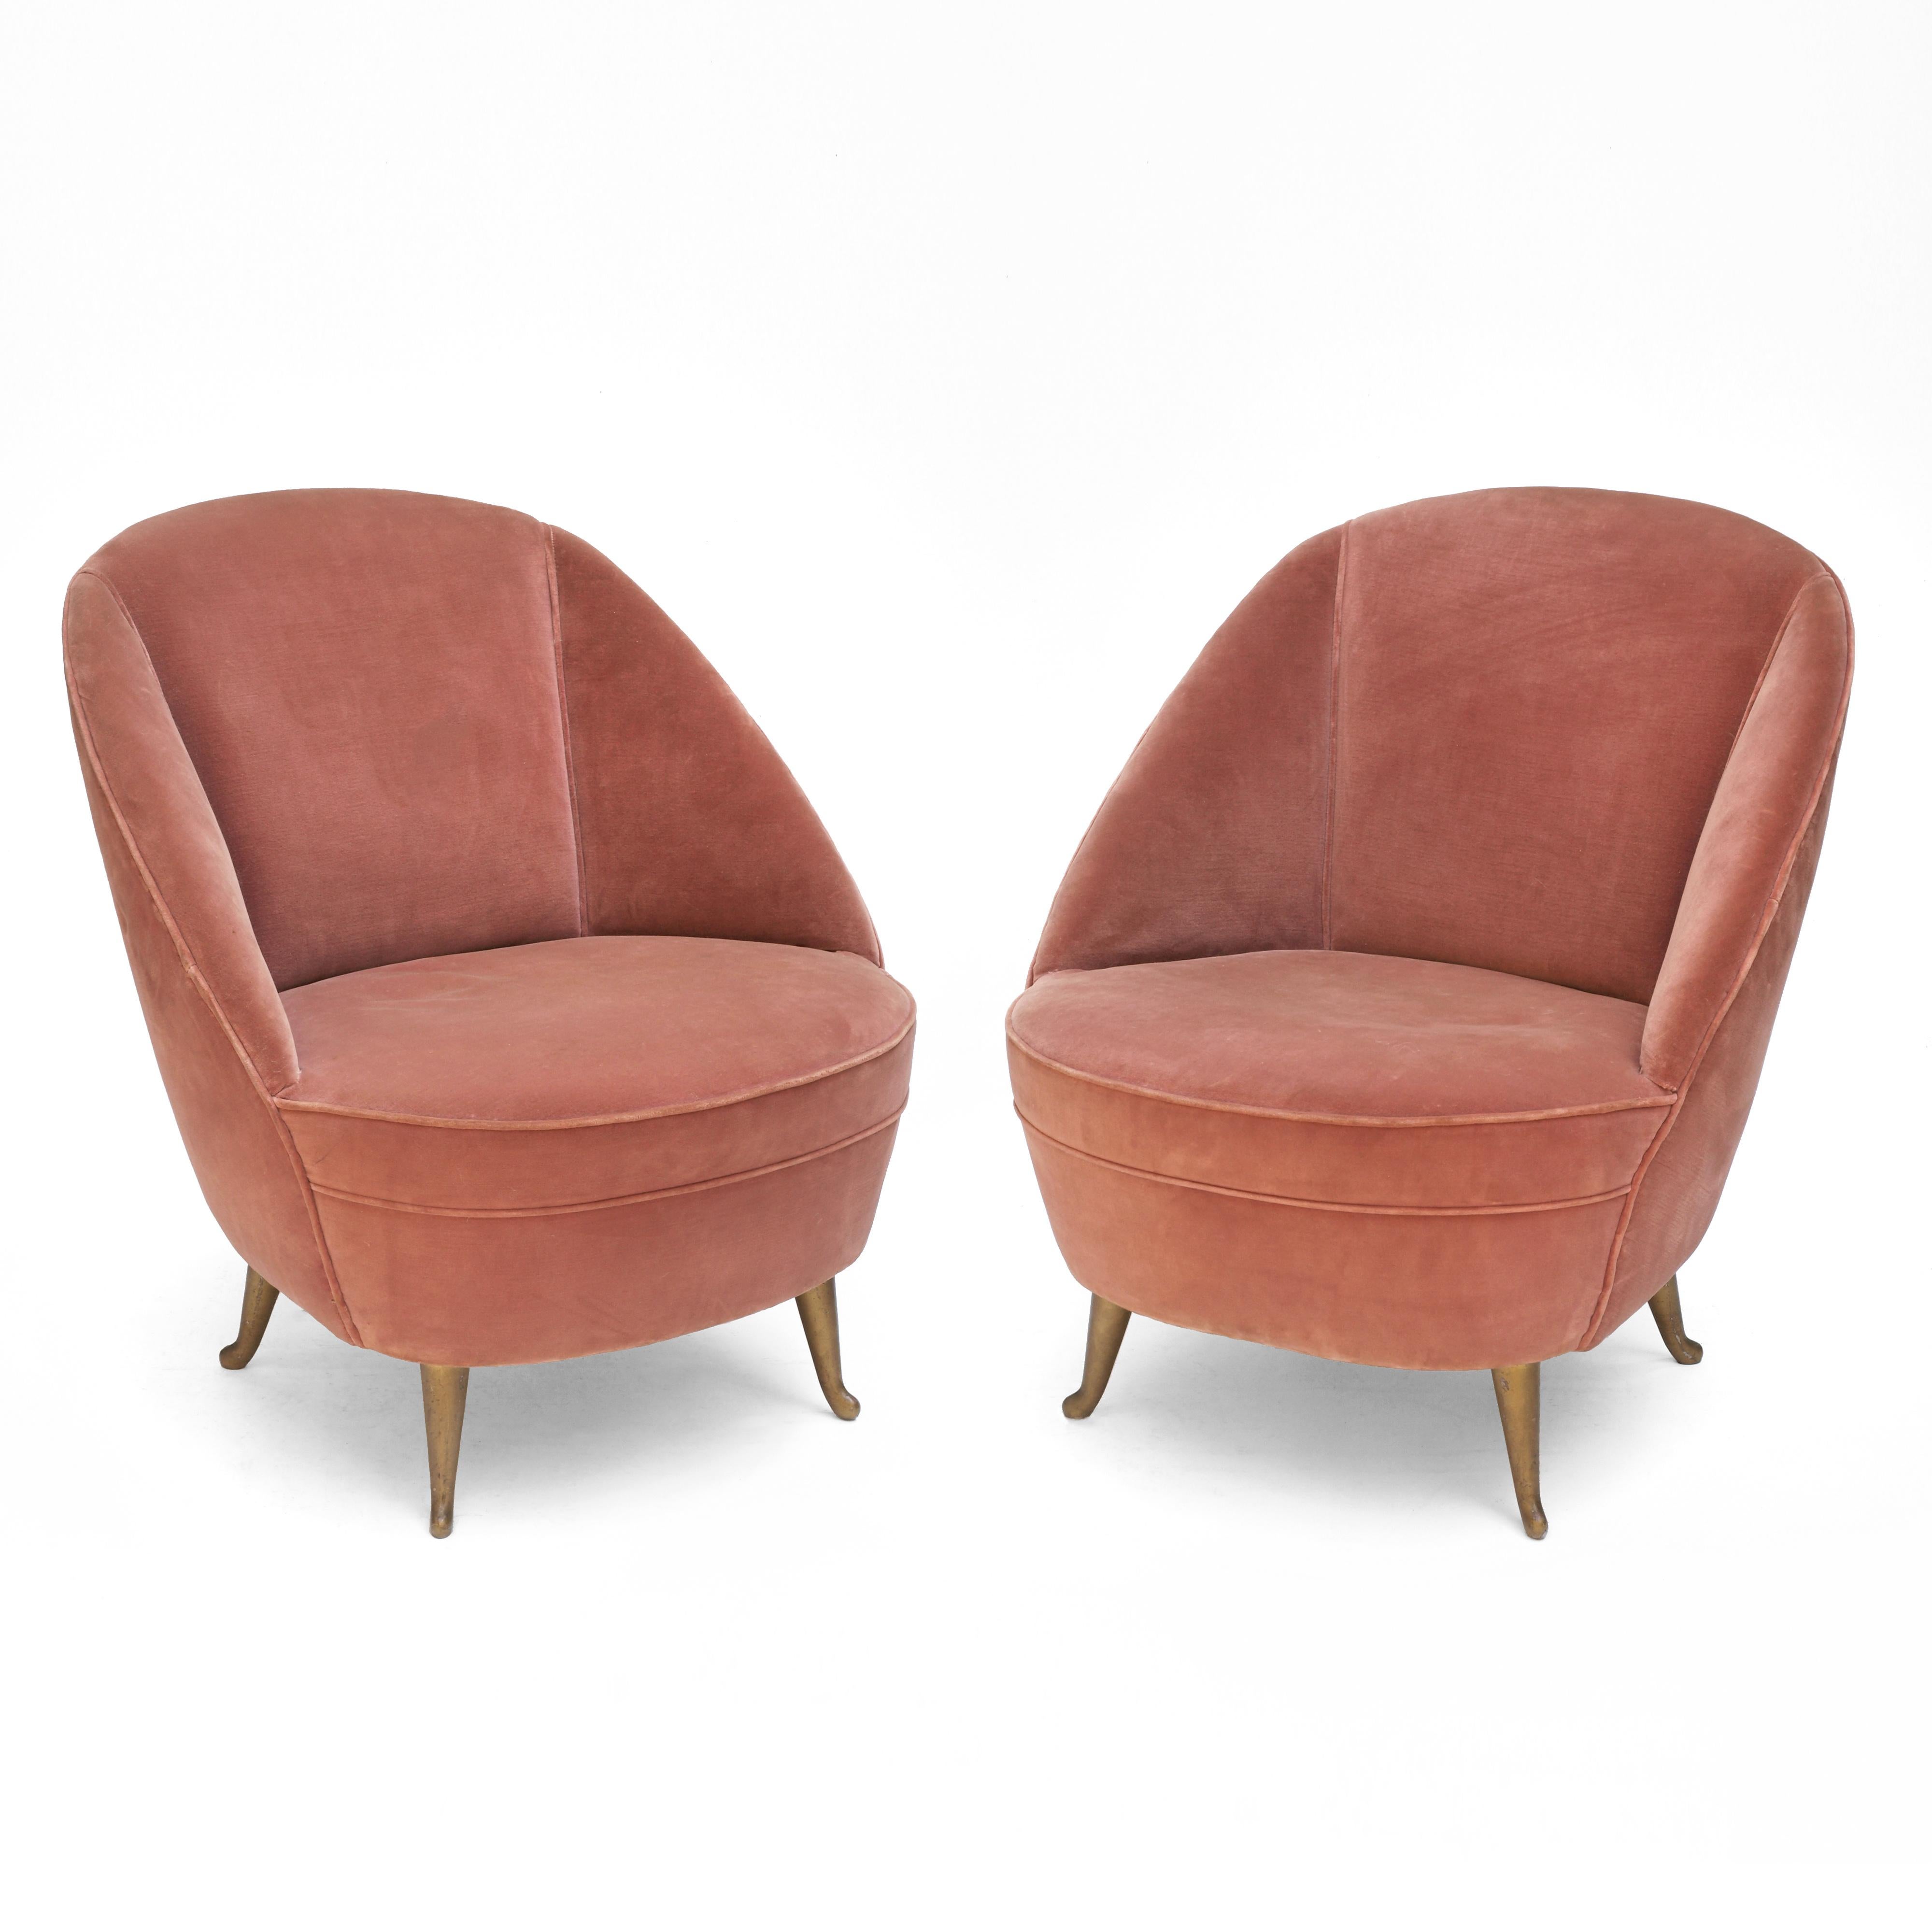 Italian Pair of Side Chairs for I.S.A Bergamo, 1950s